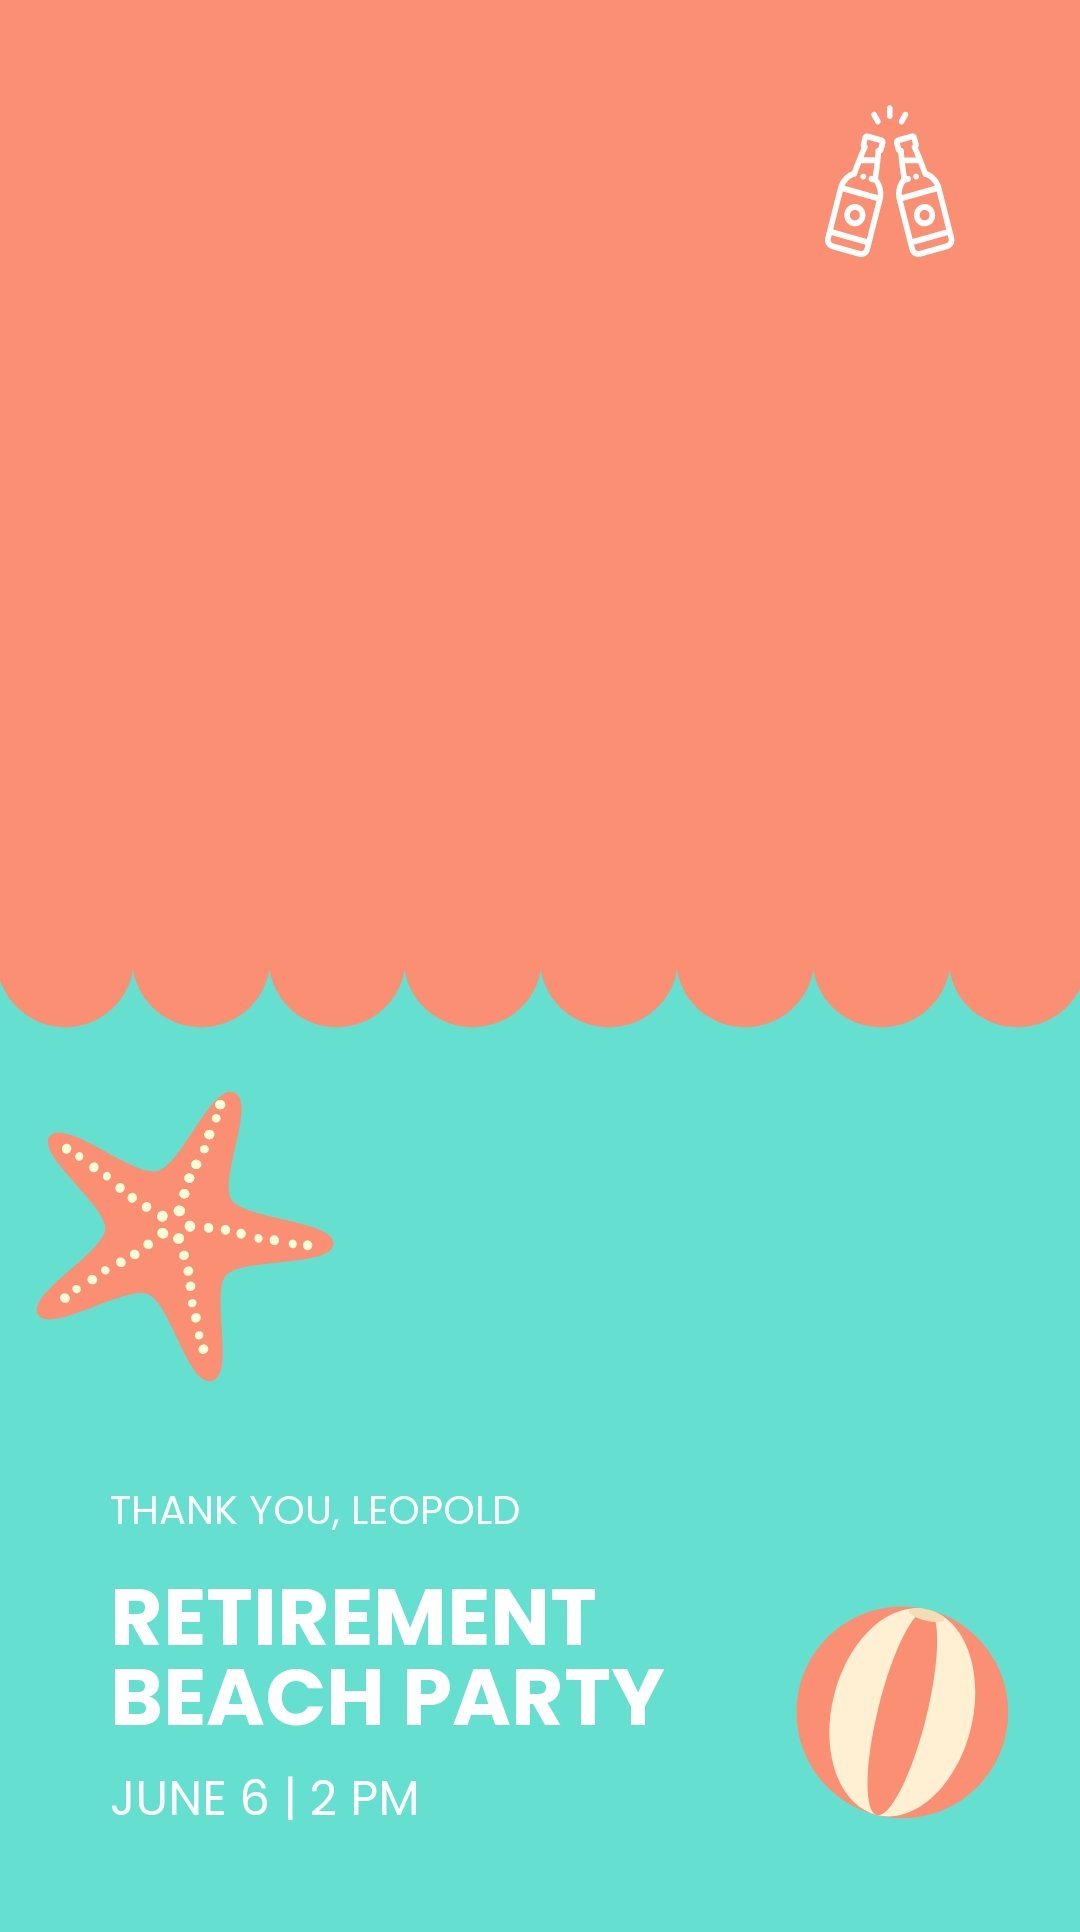 Retirement Beach Party Snapchat Geofilter